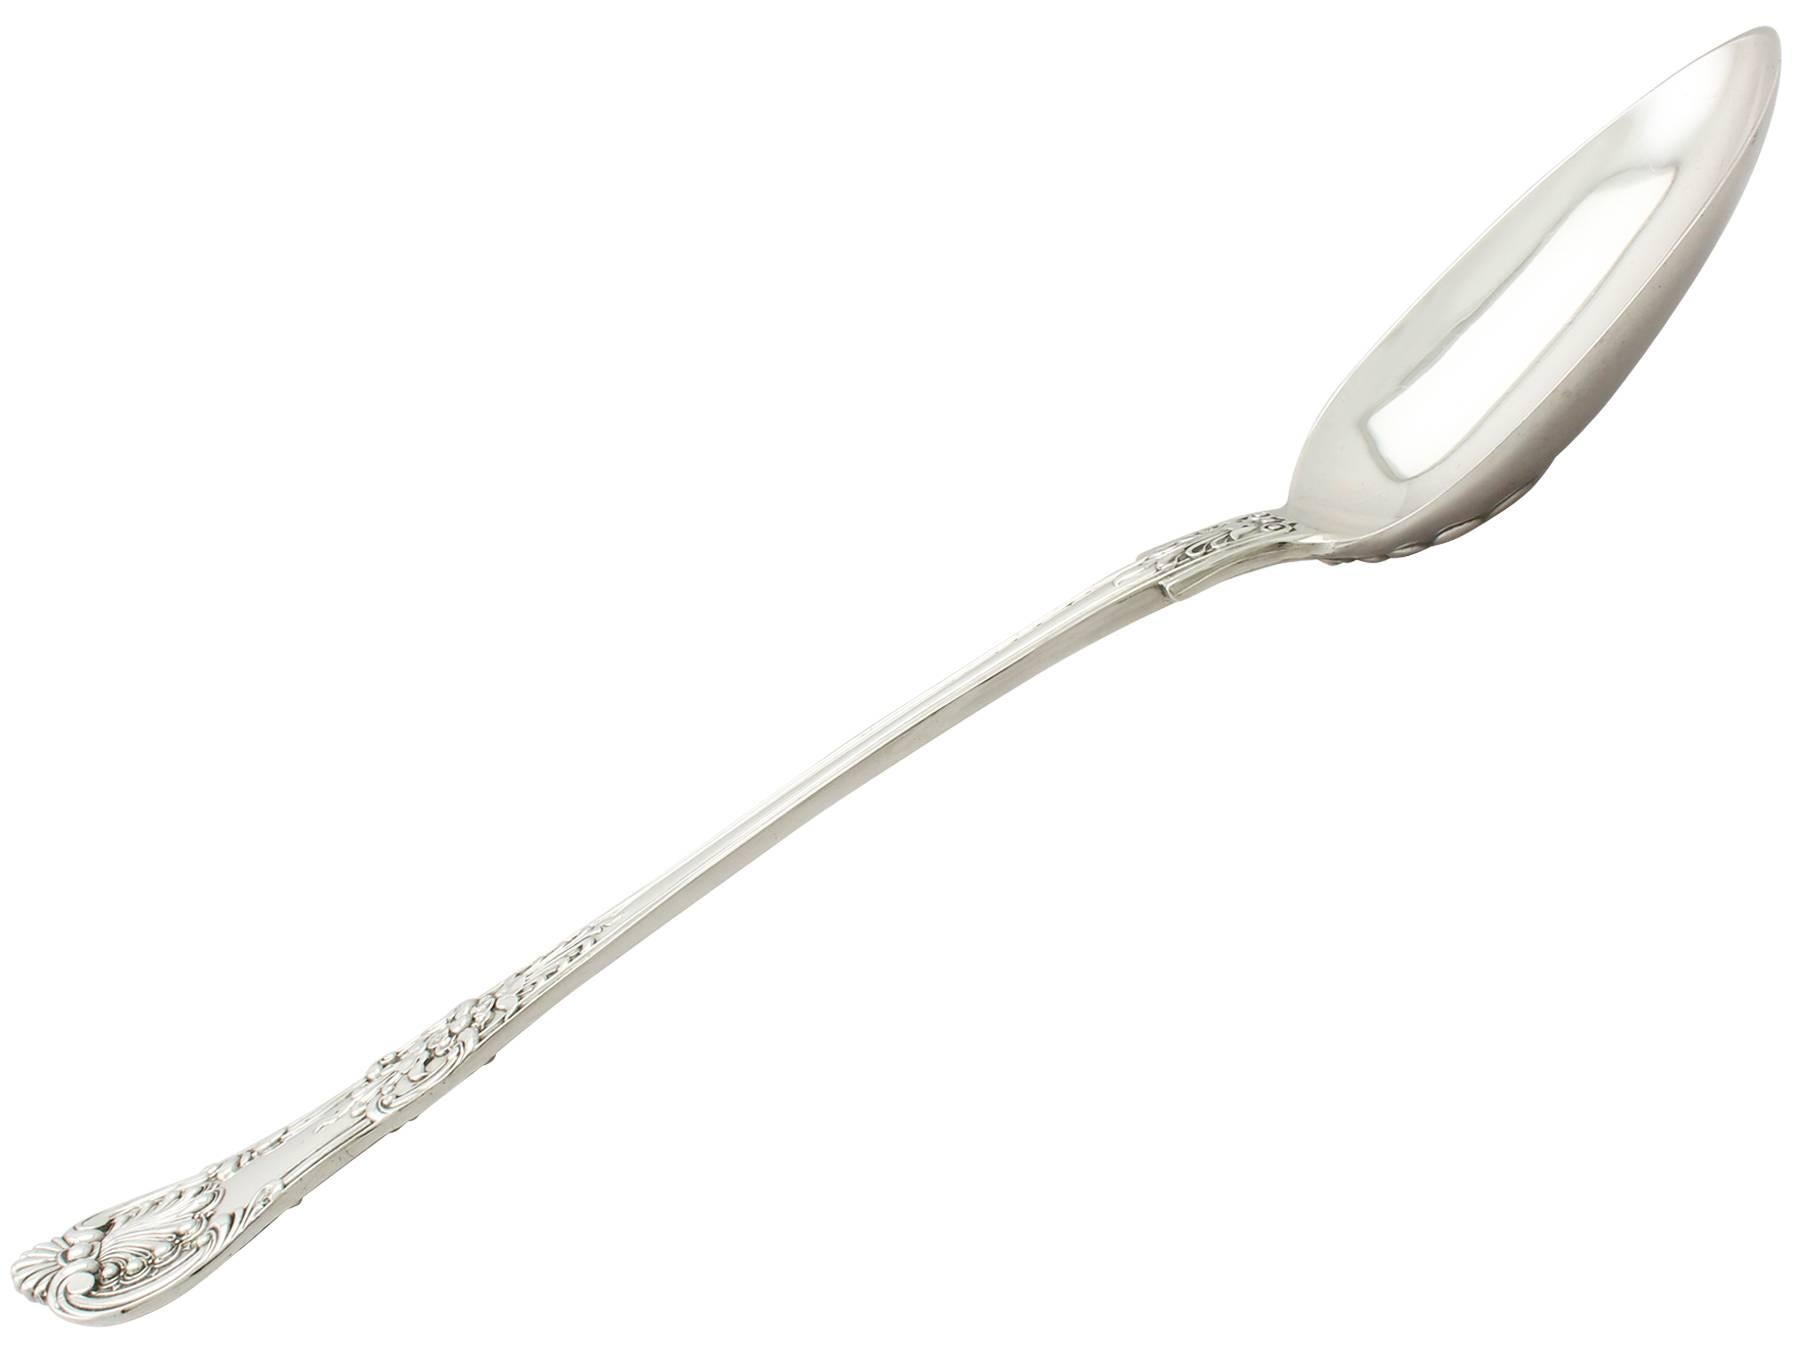 An exceptional, fine and impressive, antique Victorian English sterling silver Queen's pattern gravy spoon made by George William Adams; an addition to our silver flatware collection

This exceptional antique Victorian sterling silver gravy spoon